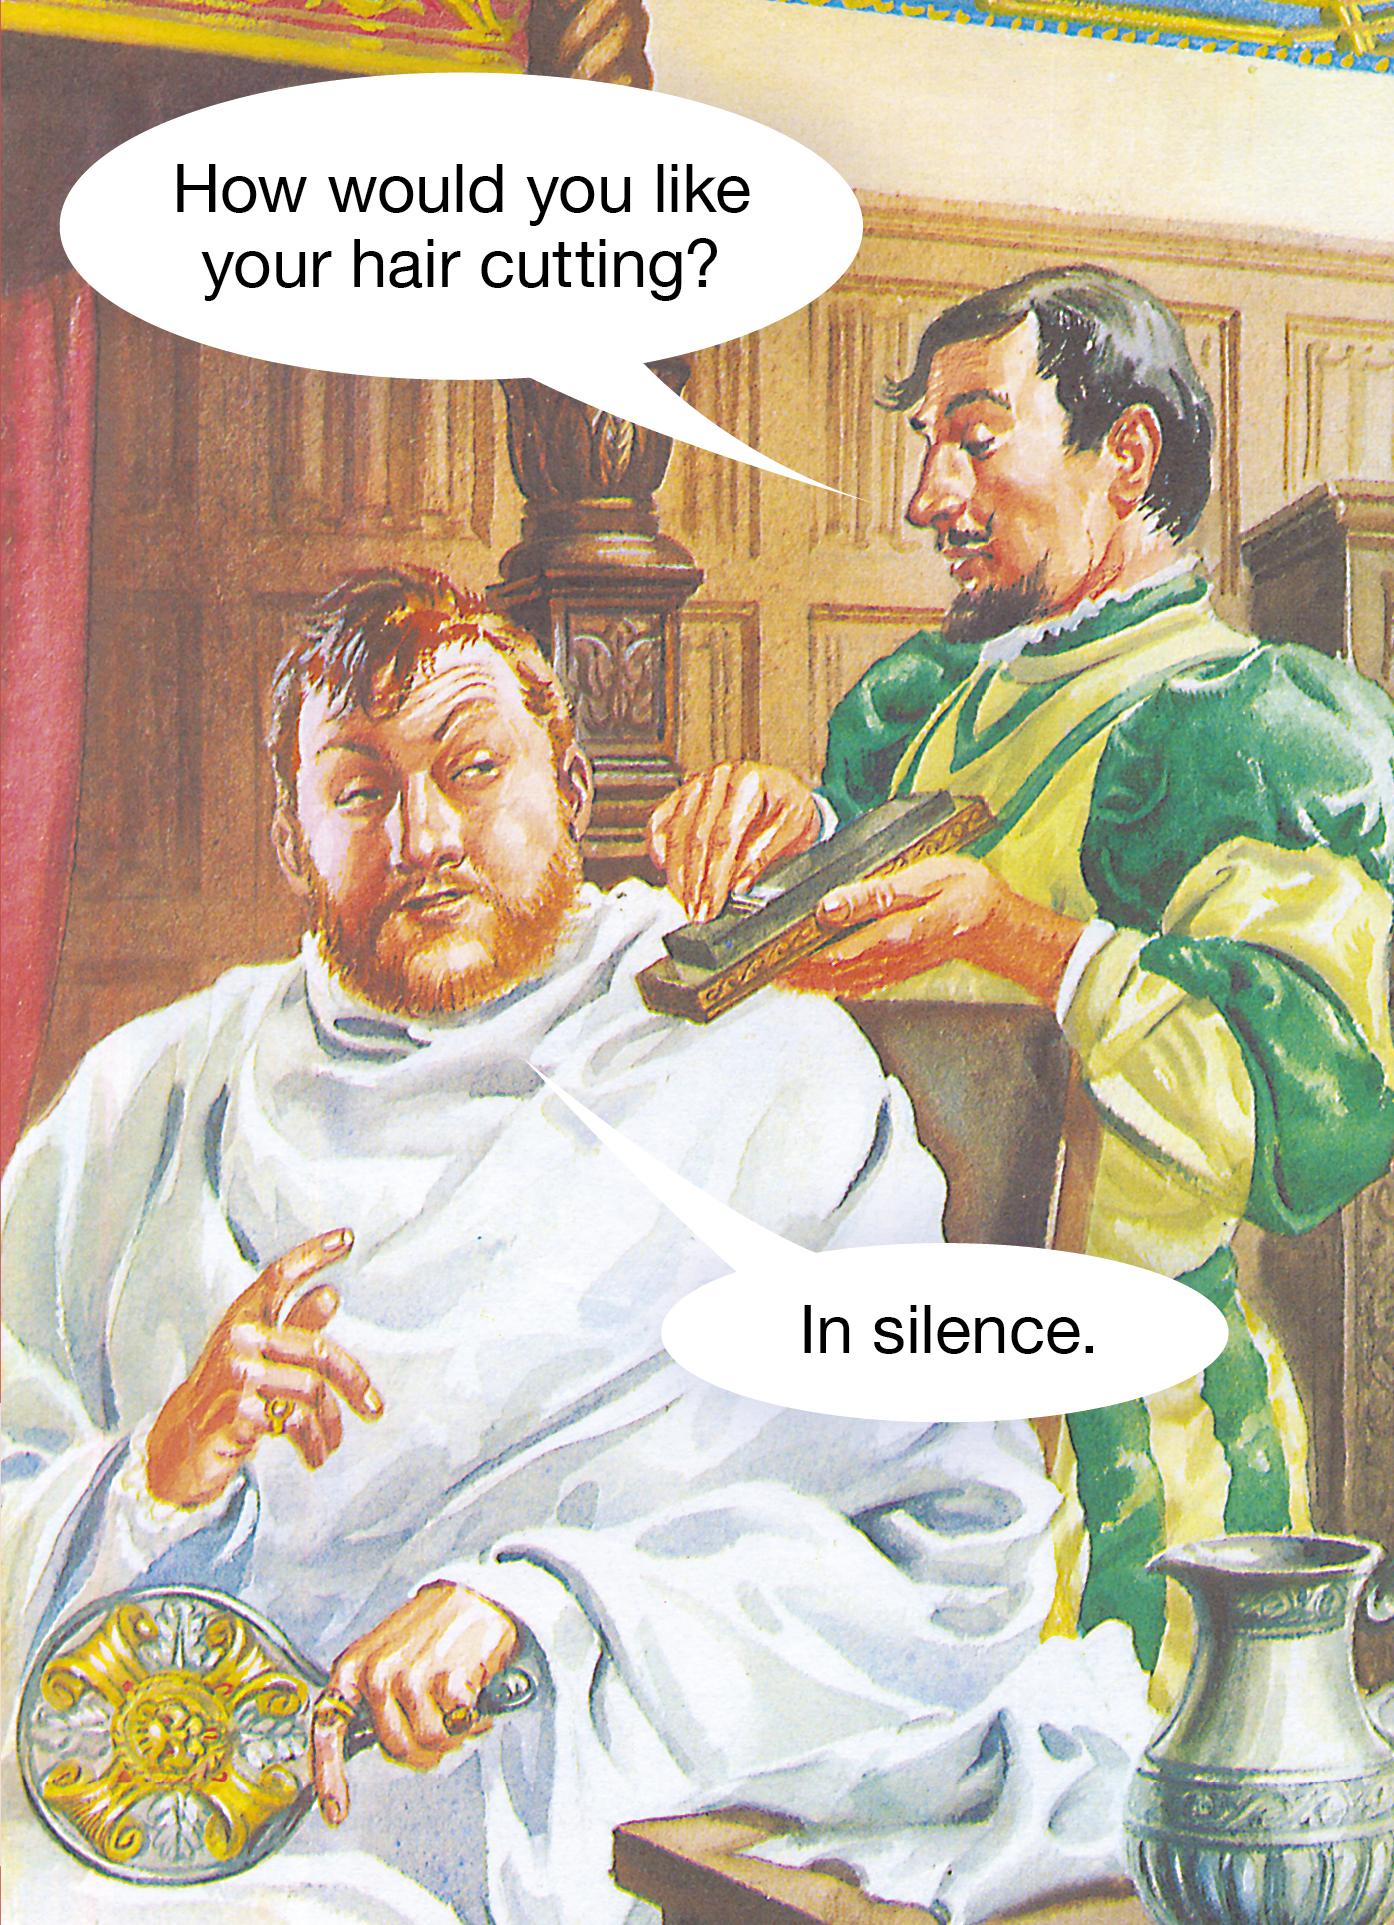 How would you like your hair cutting? In silence